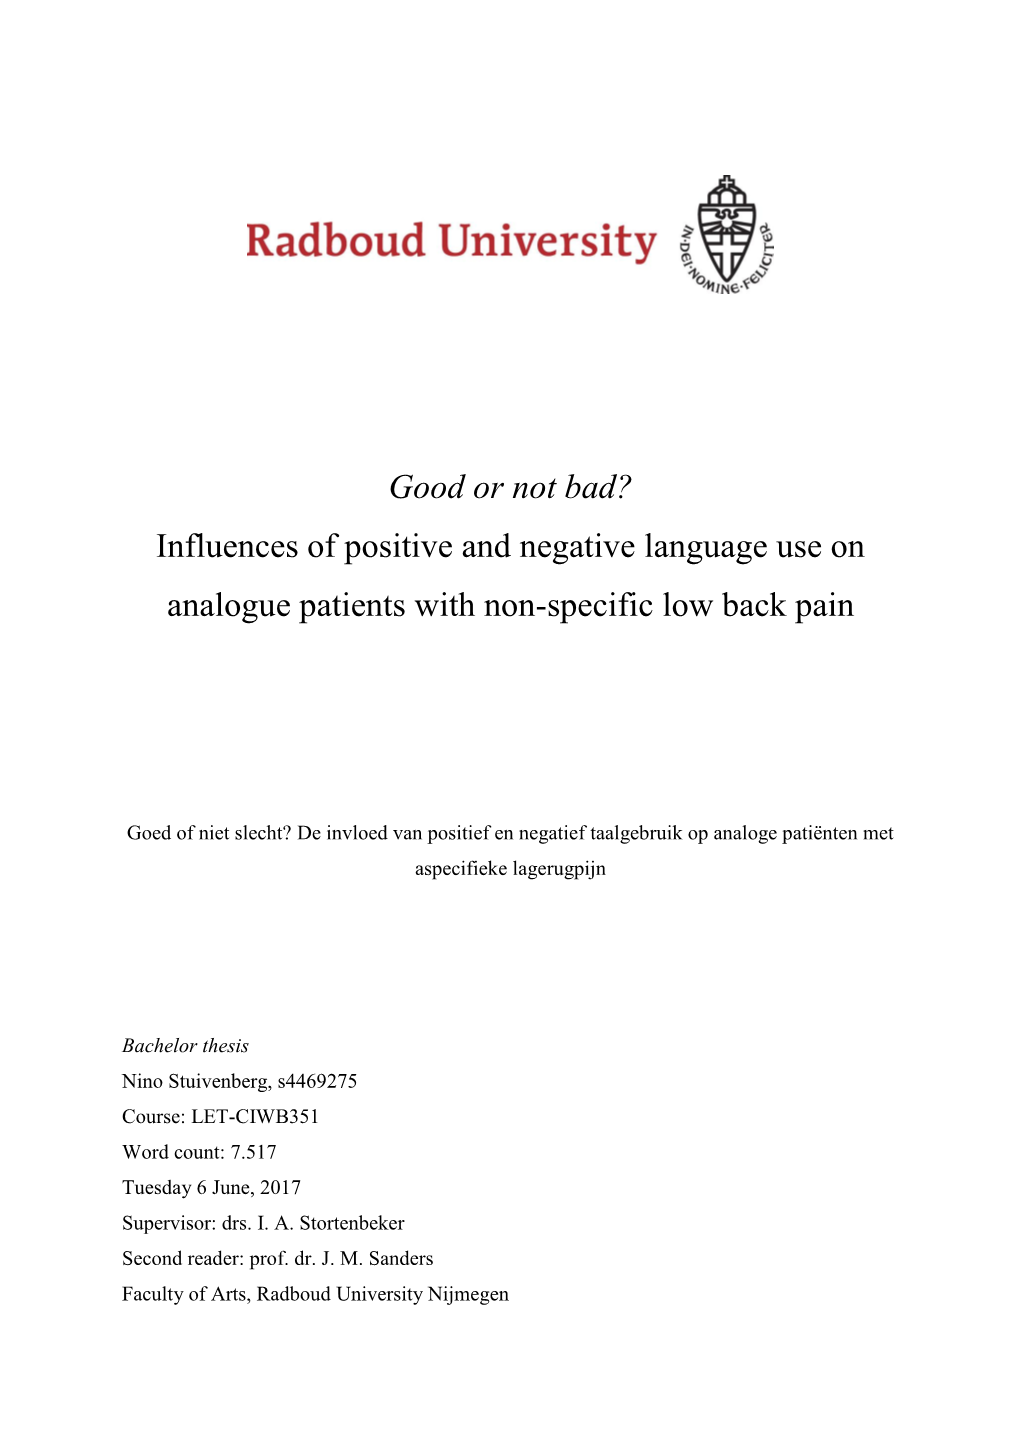 Good Or Not Bad? Influences of Positive and Negative Language Use on Analogue Patients with Non-Specific Low Back Pain